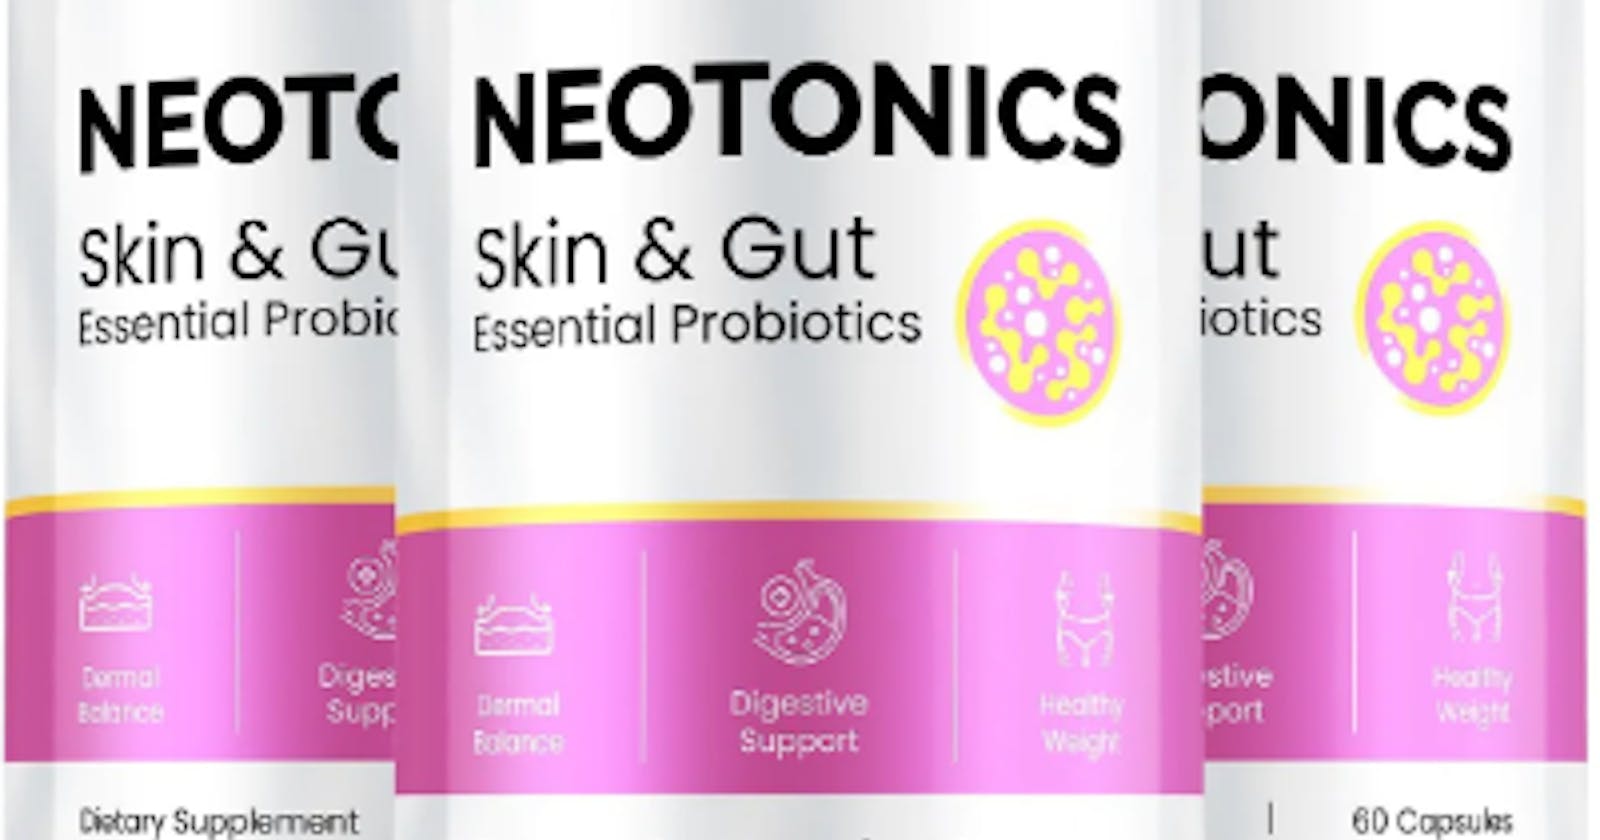 The Best NeoTonics Products for Nurturing Skin and Gut